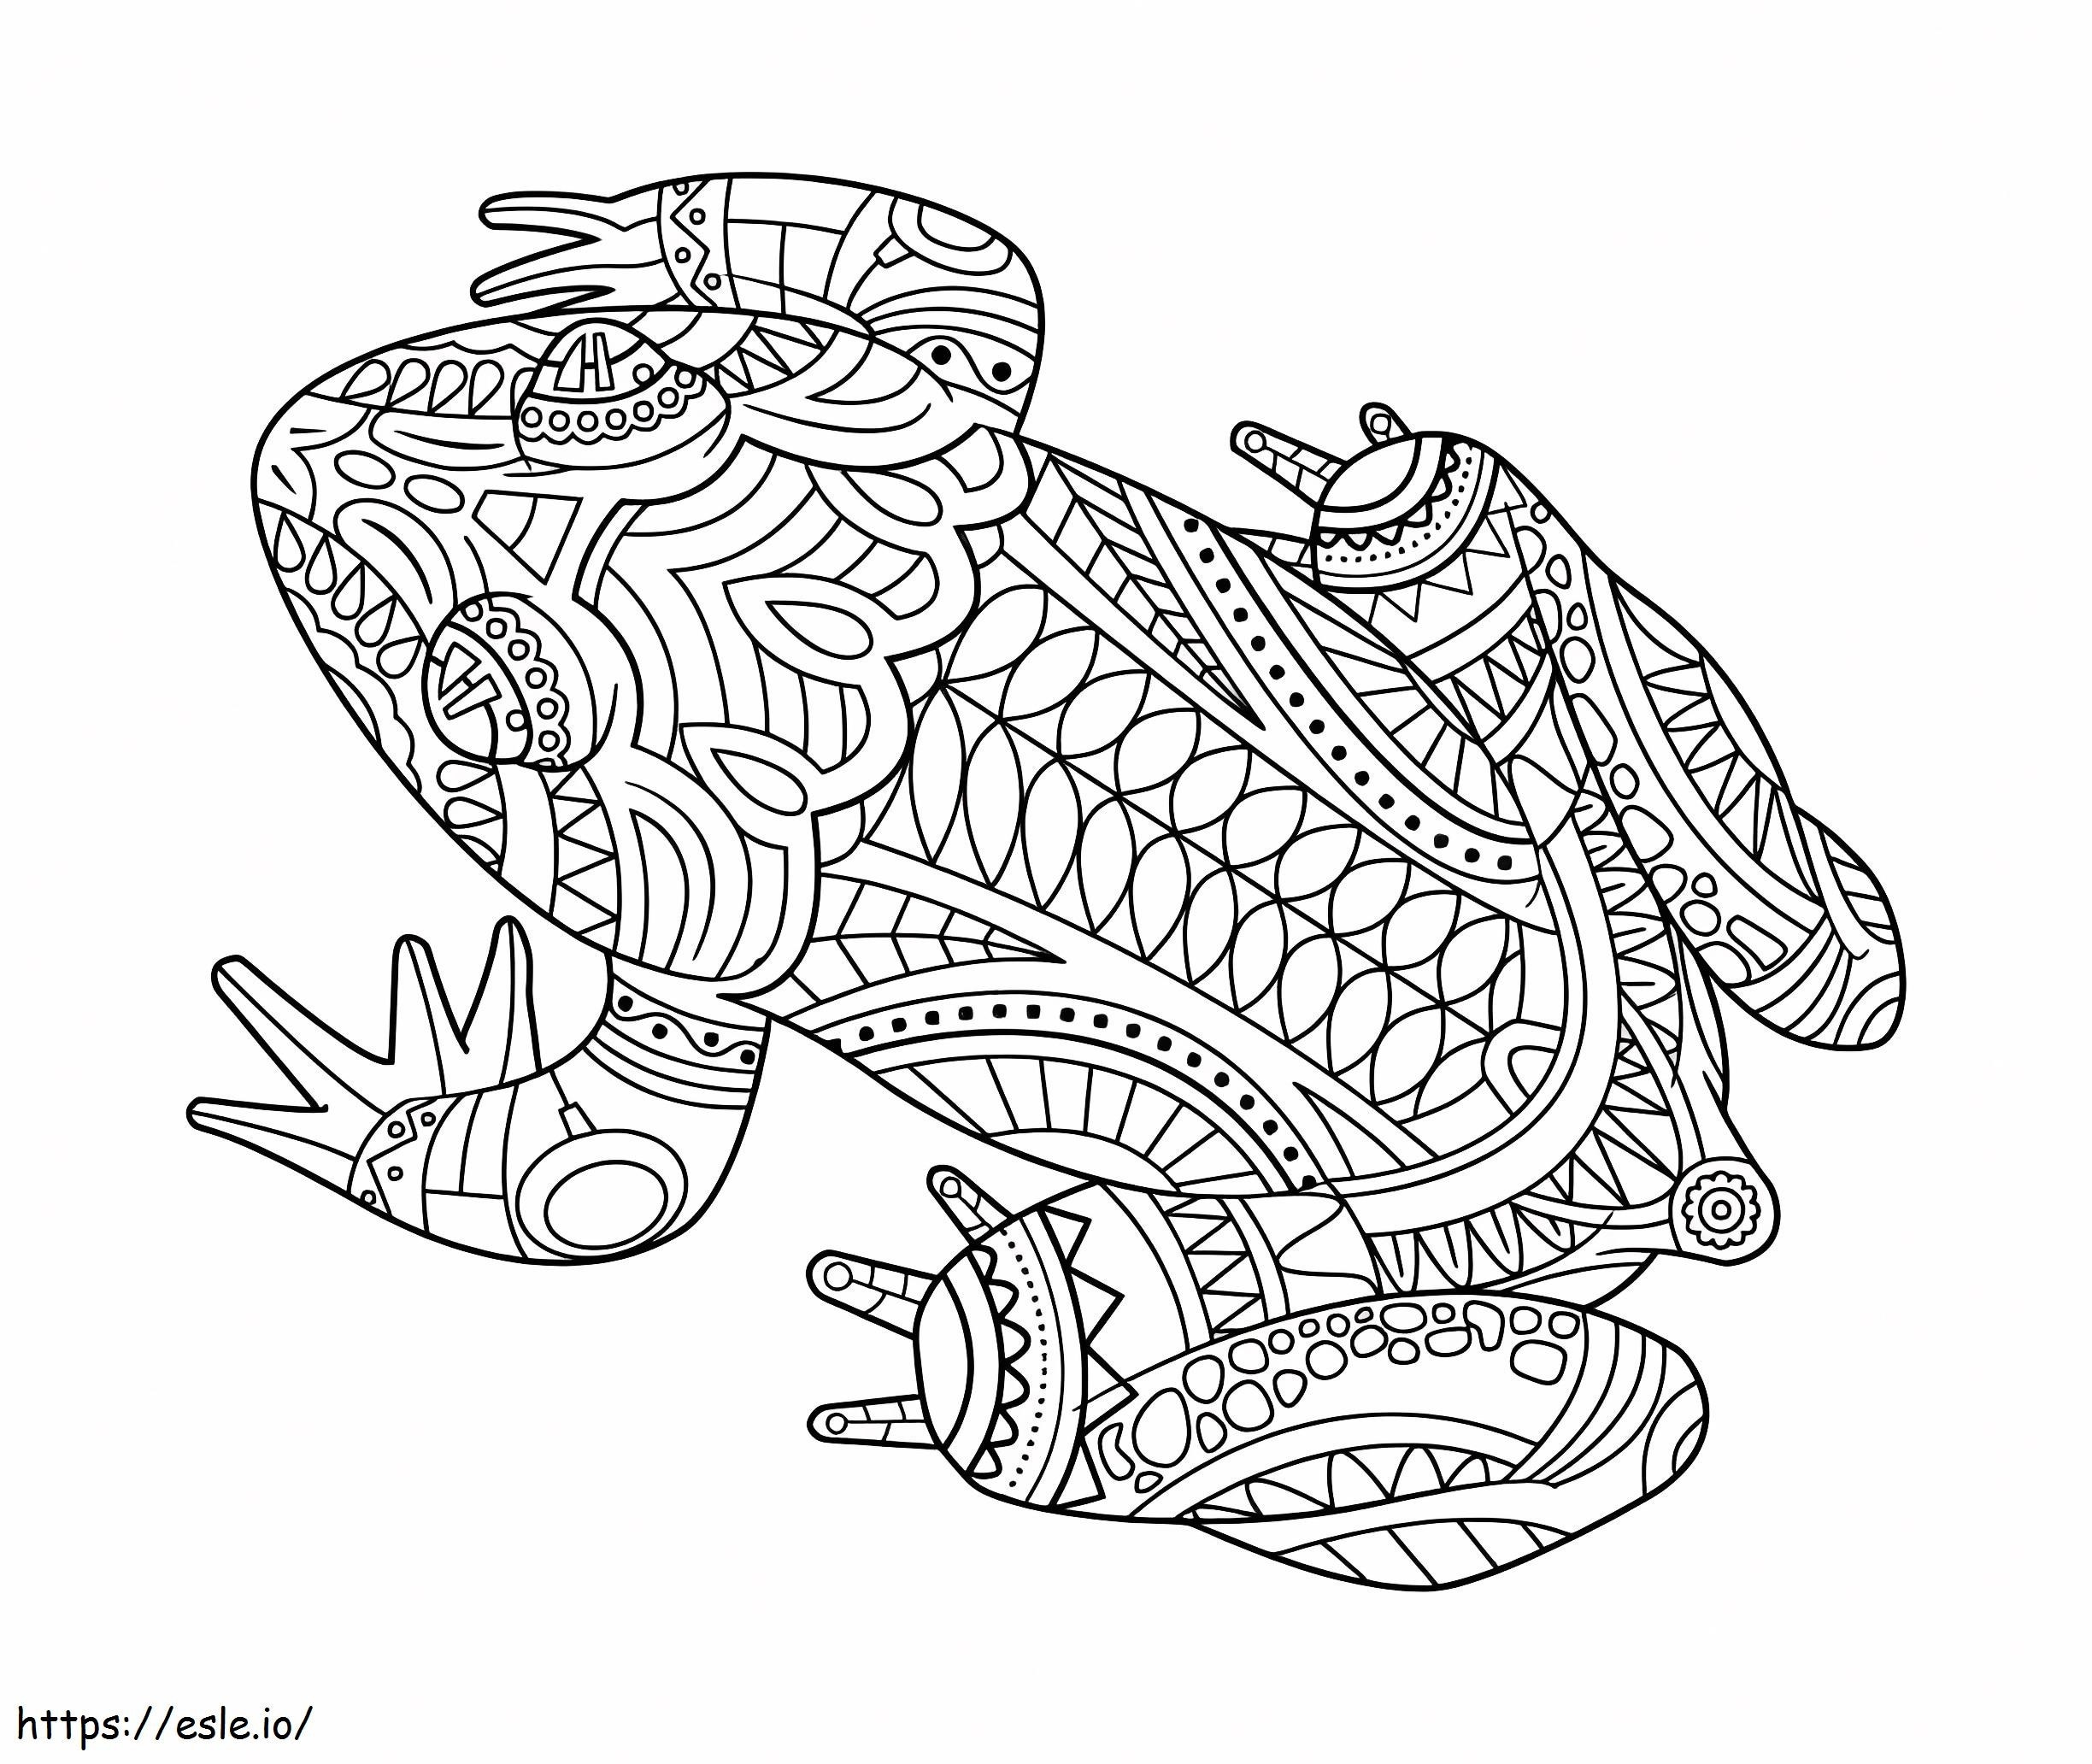 Frog Is For Adults coloring page